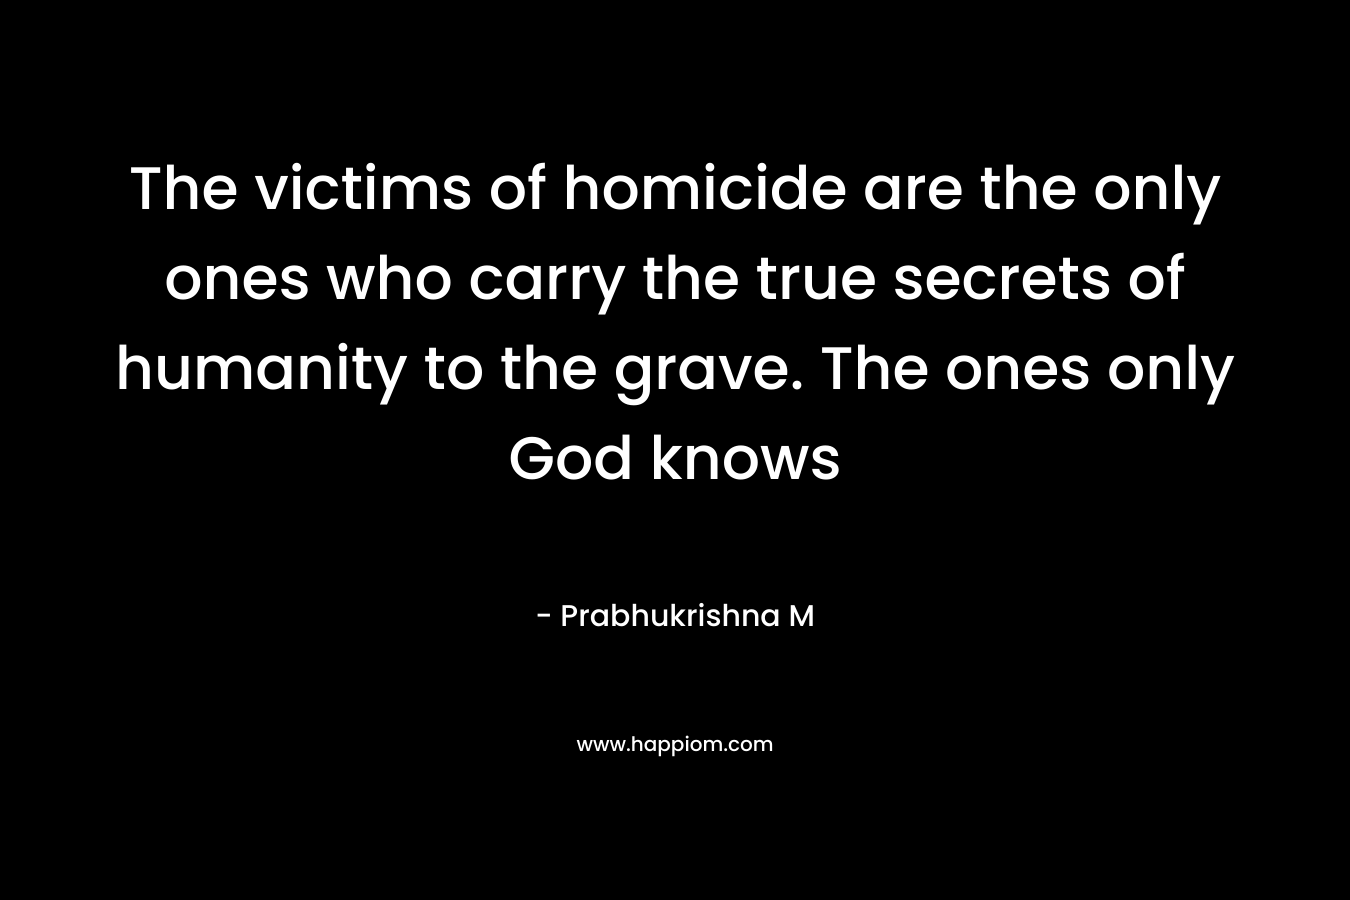 The victims of homicide are the only ones who carry the true secrets of humanity to the grave. The ones only God knows